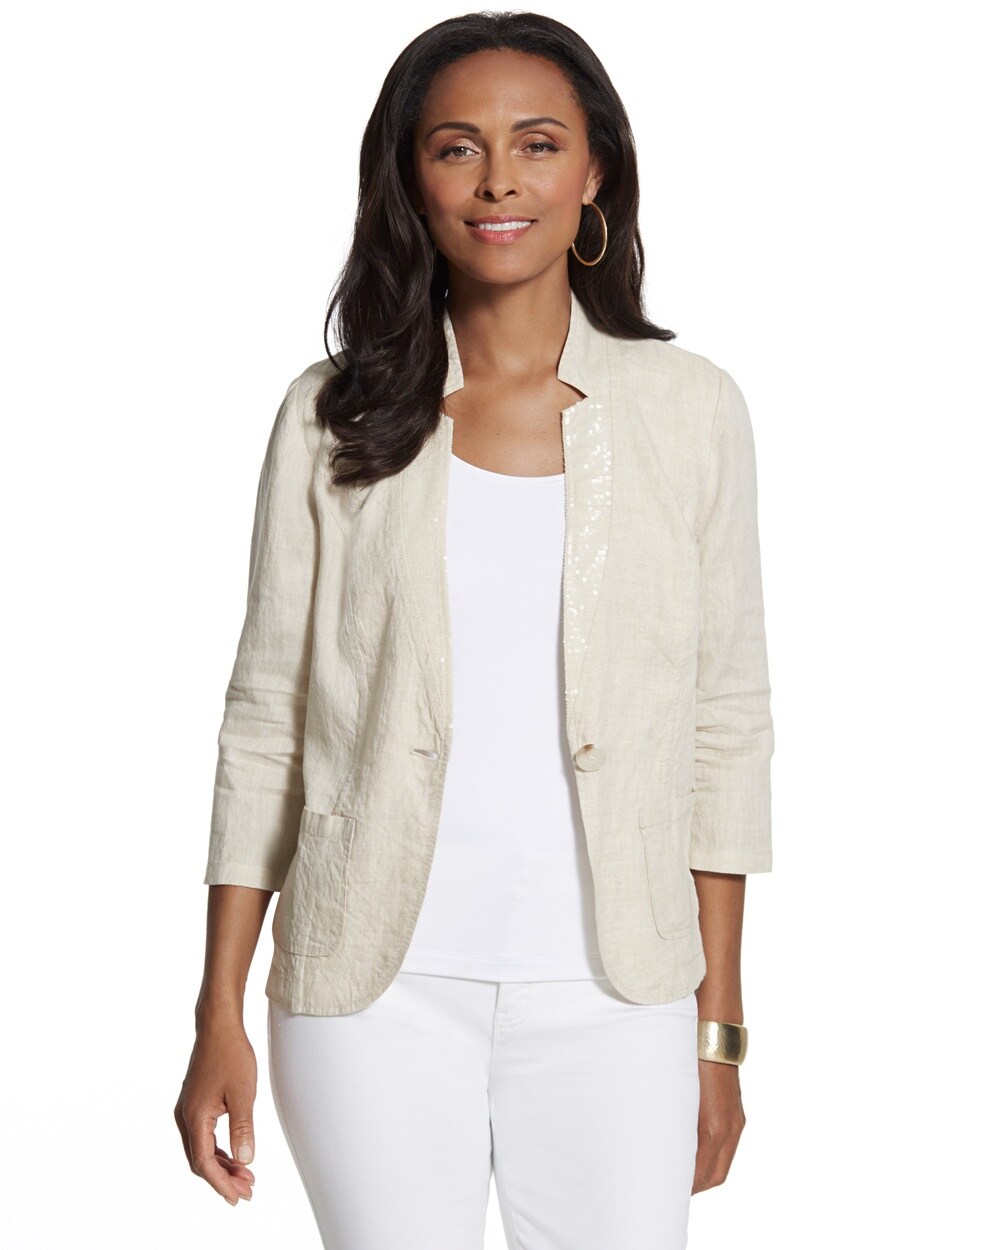 Clothing - Women's Jackets - Chico's